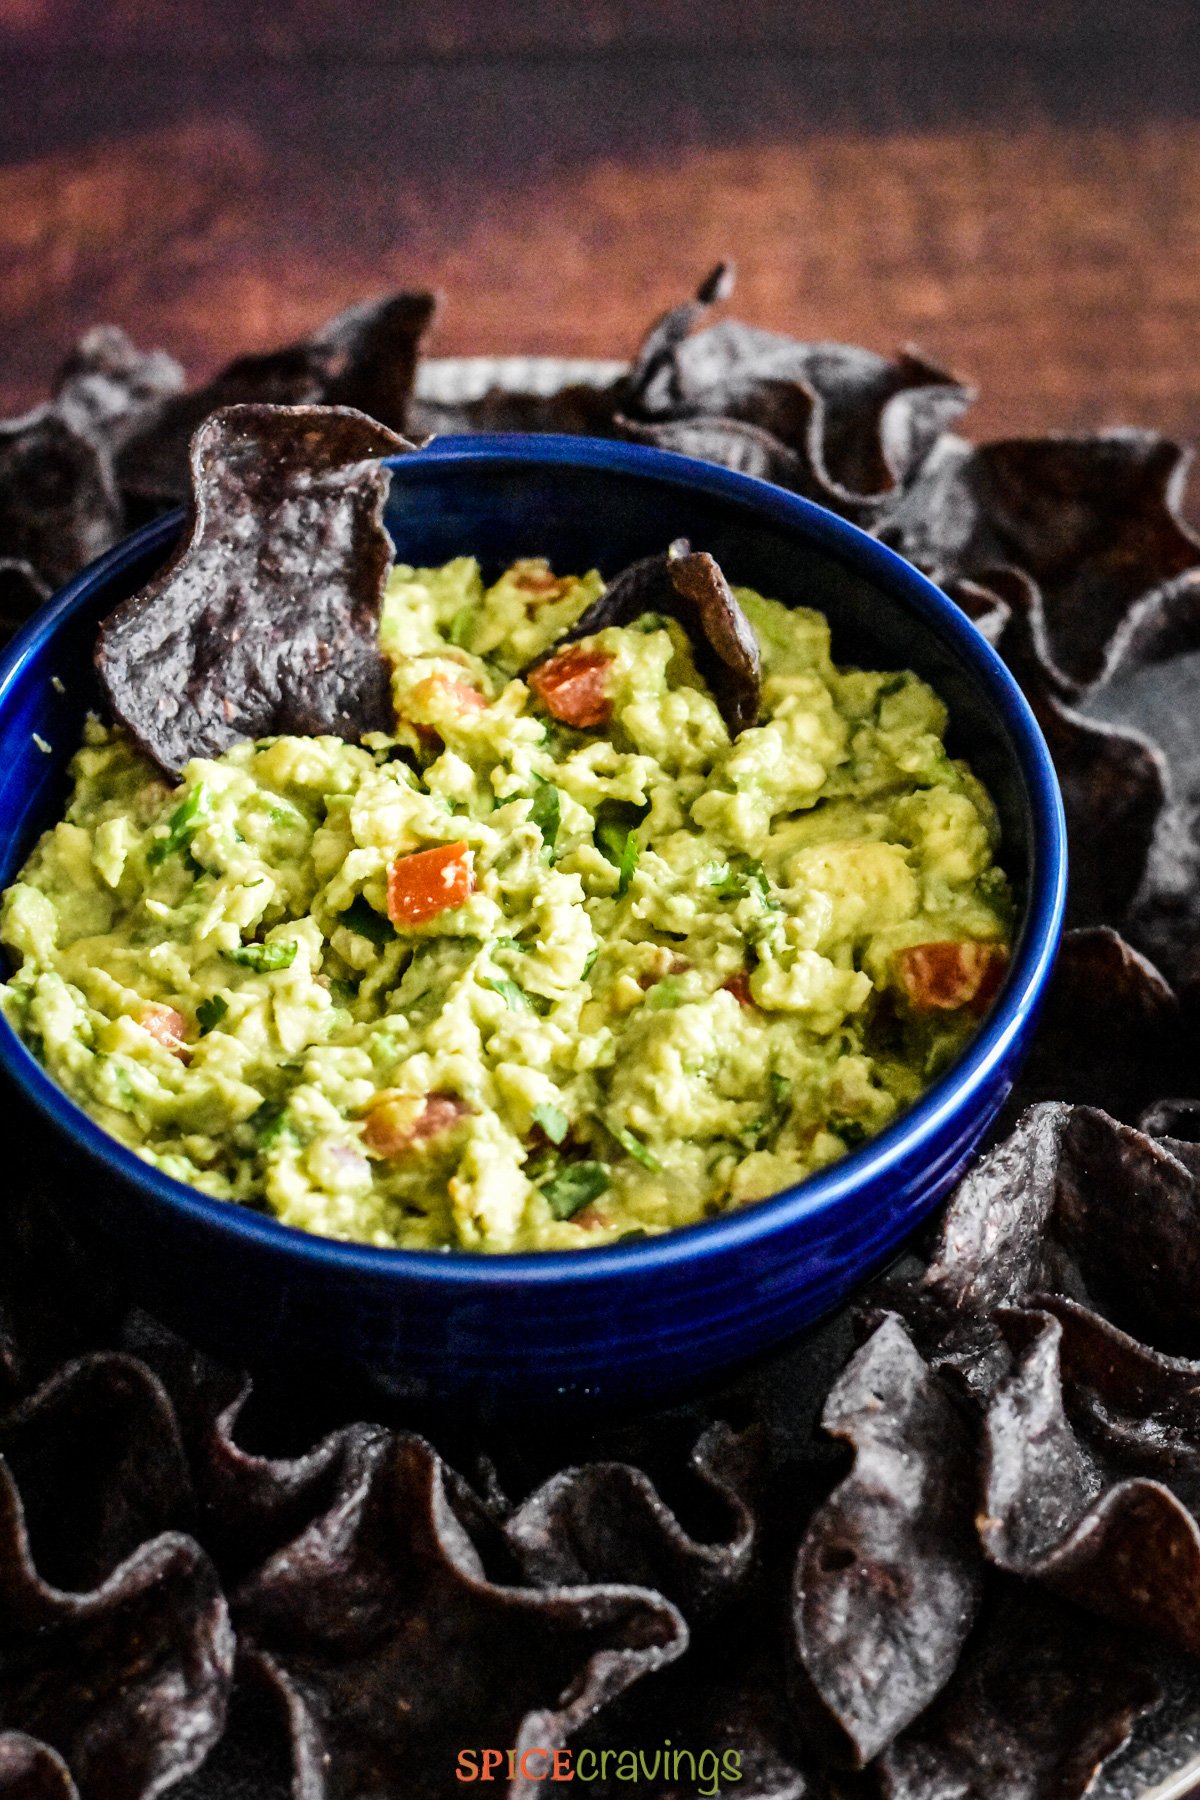 A bowl of fresg guacamole with blue corn chips served around